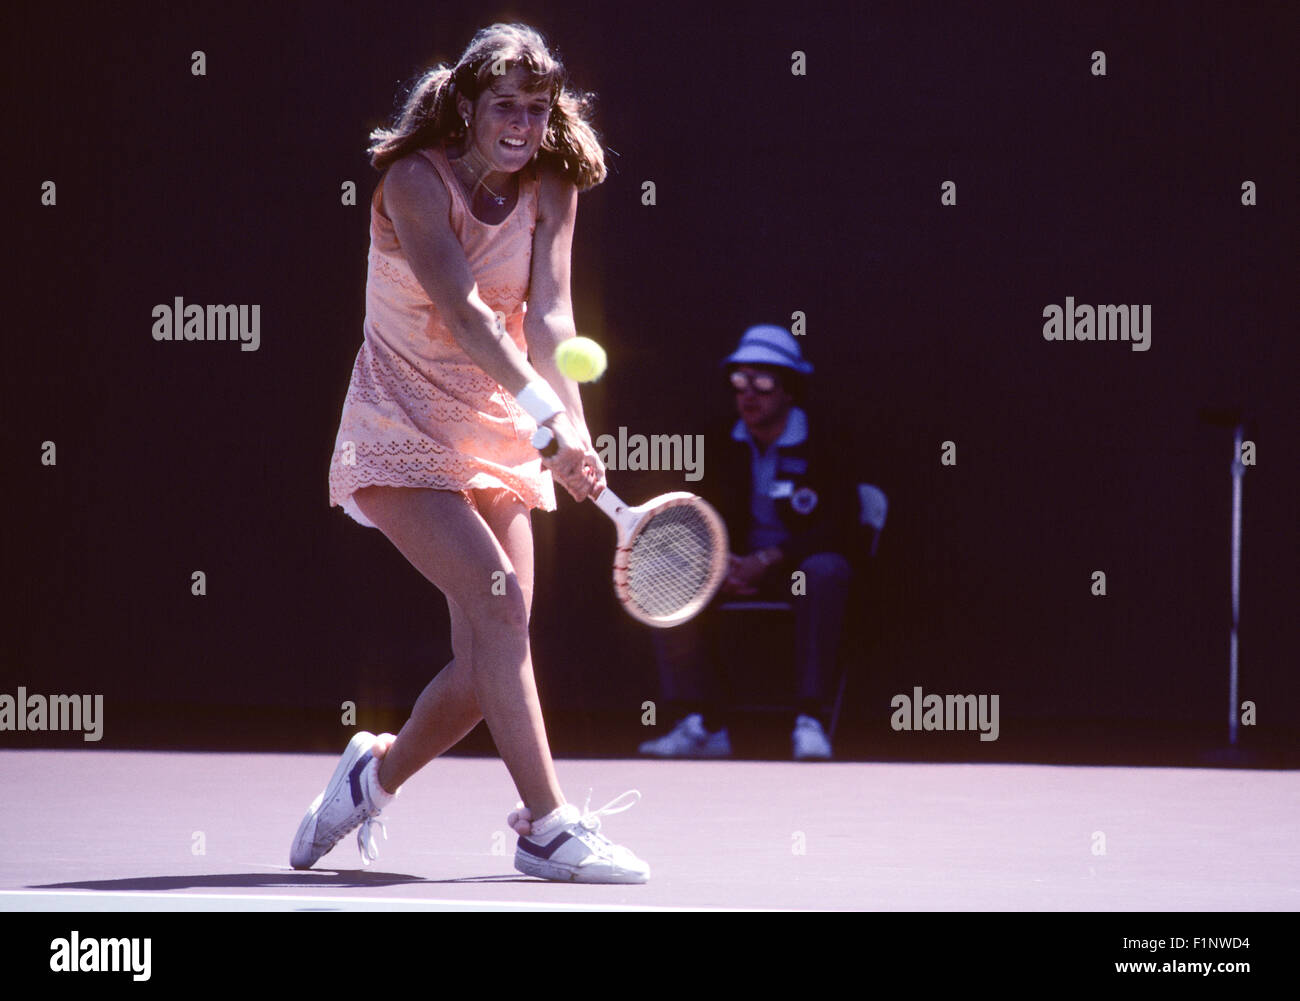 Tracy Austin in action at the Clairol Crown tennis tournament at La Costa Resort in Carlsbad, California in April 1980. Stock Photo